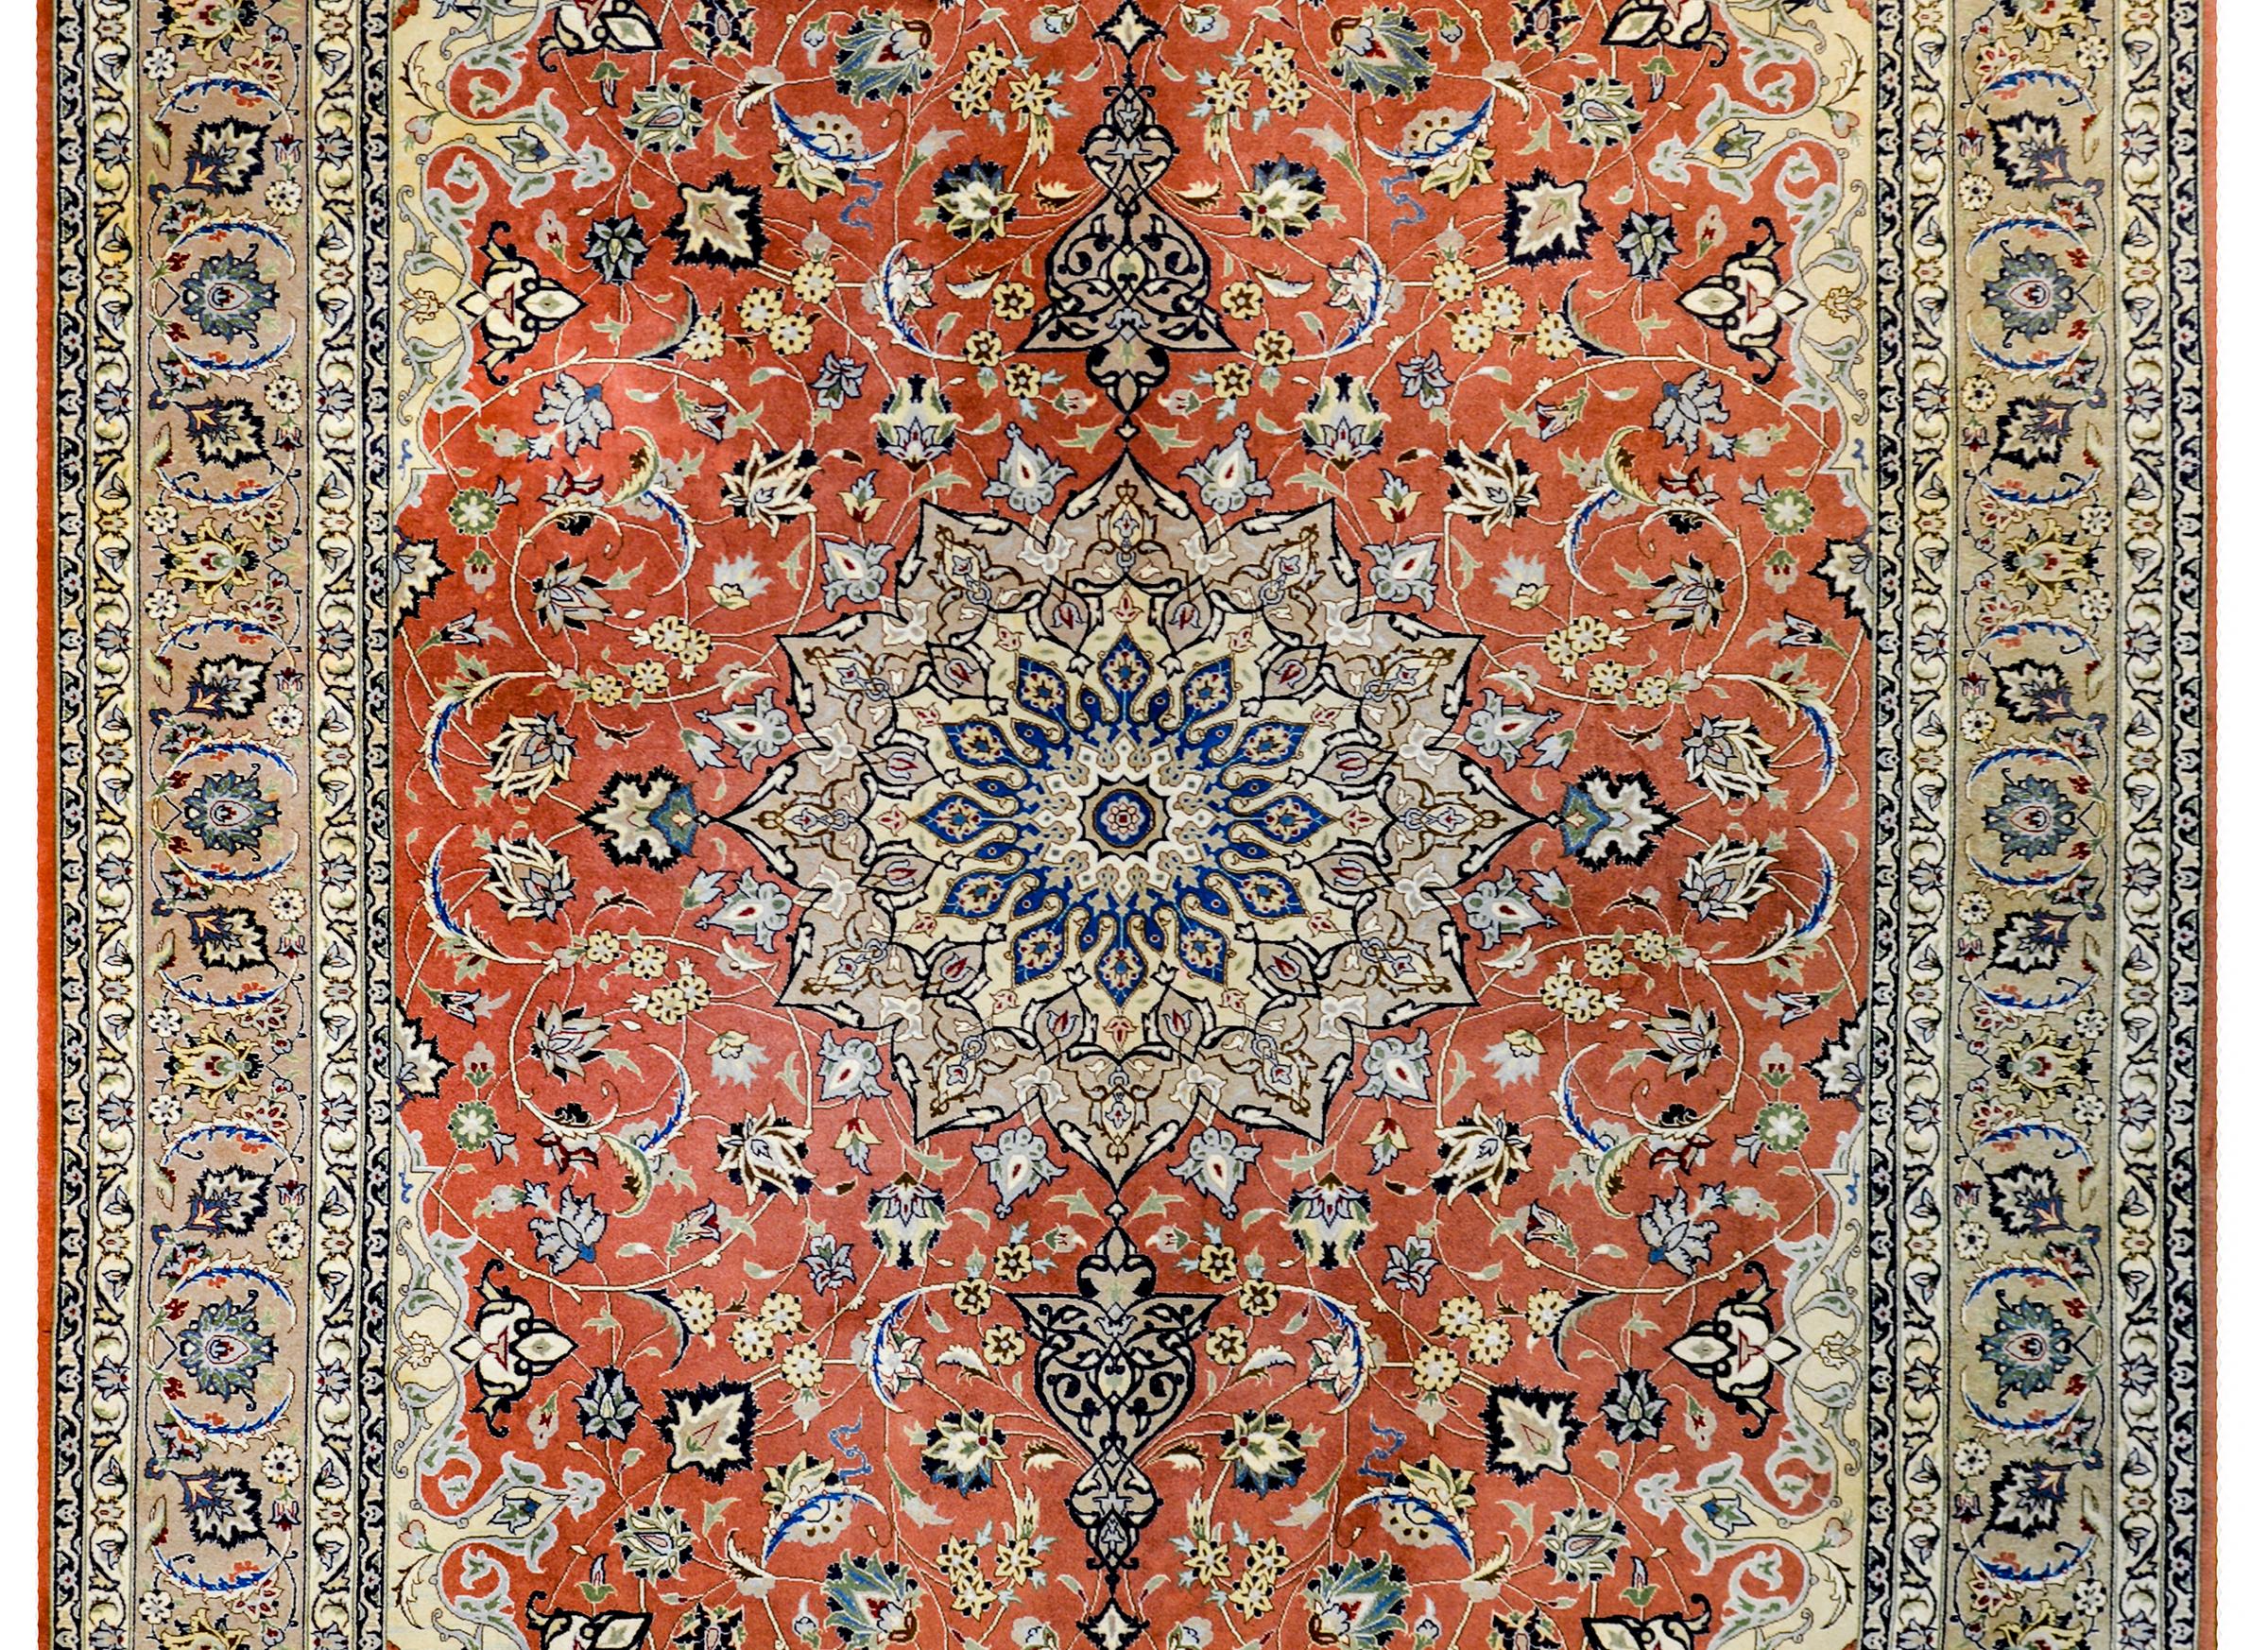 An extremely fine late 20th century Persian Tabriz with a mesmerizing pattern containing a large central multi-lobed medallion on a orange field of scrolling vines, leaves, and myriad blossoming flowers. The border is wonderful with a wide central